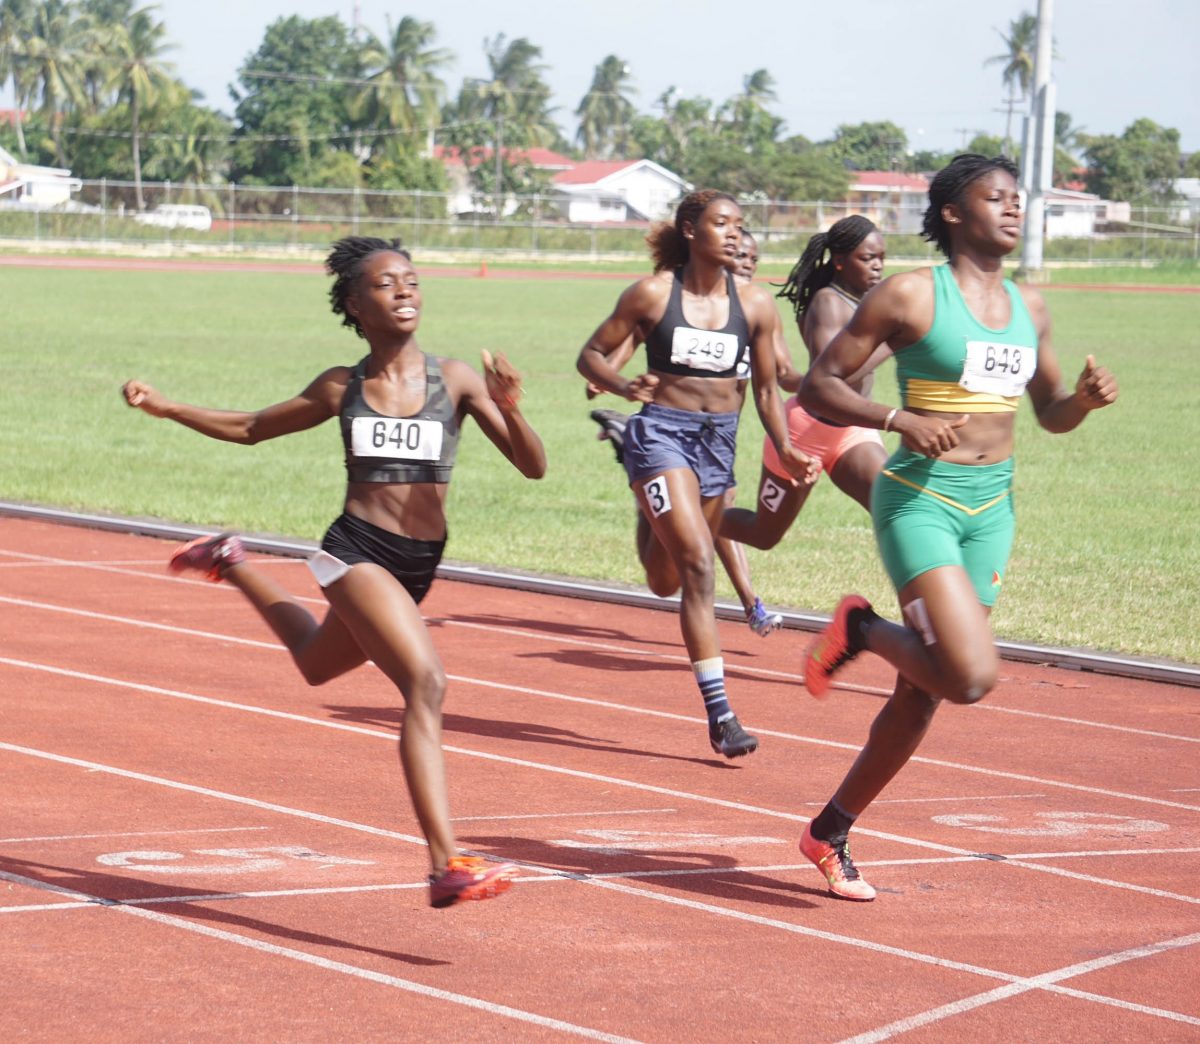 After a blistering start and a perfect drive phase, Karese Lloyd (lane 5) who clocked a personal best 11.84s was surpassed by the surging Keliza Smith (11.82) in the latter third of the 100m event. (Emmerson Campbell photo)